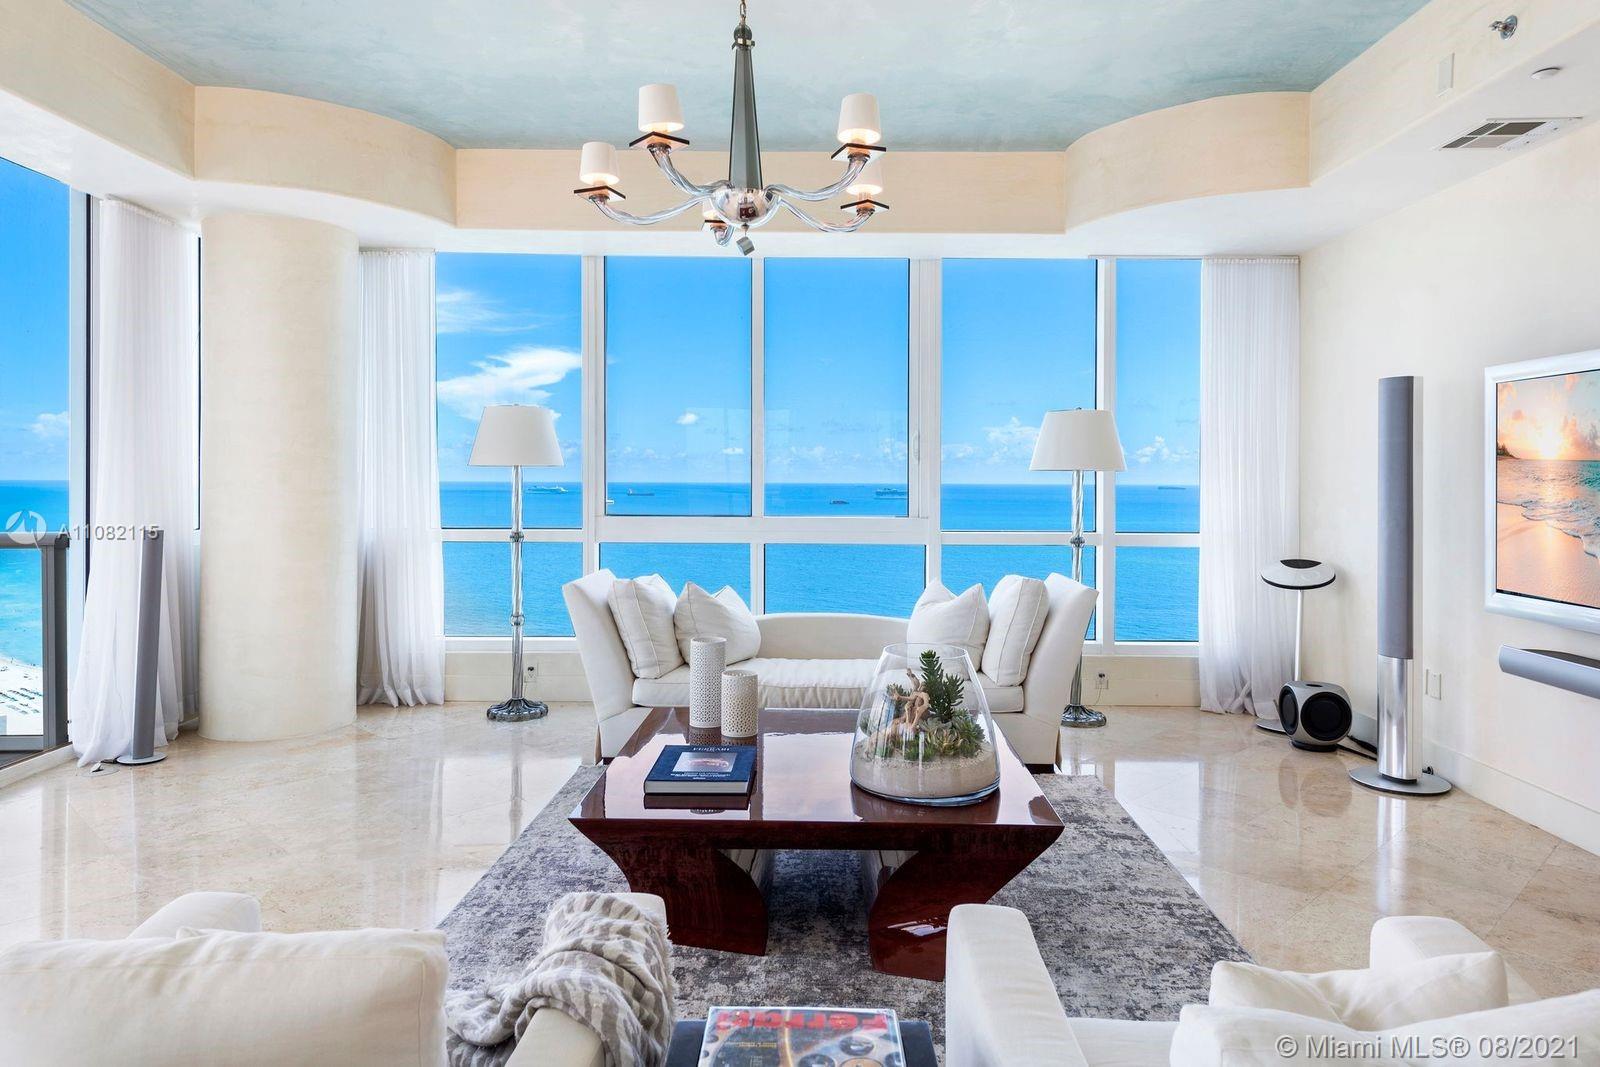 Remarkable gem rarely on the market! This flow through, double corner residence at the notable Continuum exhibits stunning sunrises and intimate sunsets each day. Live a life in paradise perched above the Atlantic Ocean on the 35th floor with incredible wrap-around panoramas from South Pointe. Appreciate gorgeous direct ocean views as well as parading cruise ships, Fisher Island and its golf course, and the dynamic Miami skyline. Completely upgraded chef's kitchen, Lualdi doors throughout and a dreamy primary suite with his/hers oceanfront spa-bath retreat are just a few lavish features. Continuum is a 13 acre, private beachfront sanctuary with amenities and attention to its residents second to none, including a private restaurant+beach club, 3 har-tru tennis courts, gym/spa/salon+3 pools.